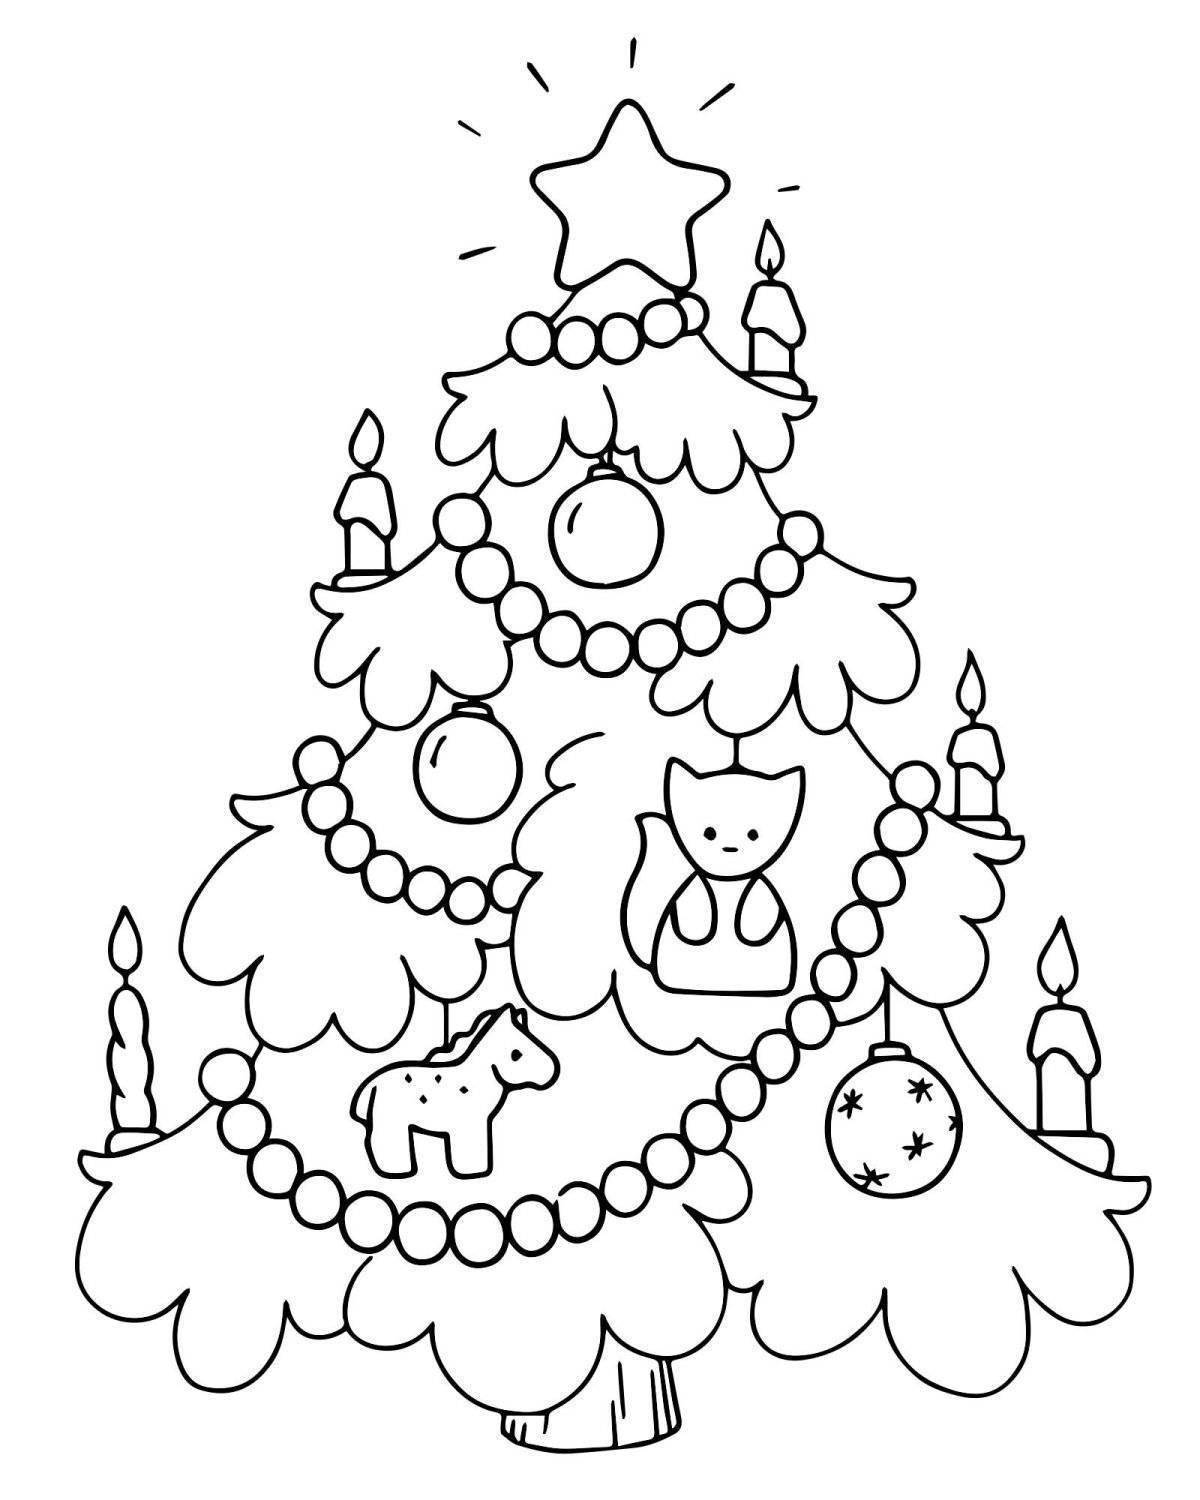 Glittering Christmas tree coloring book for 5-6 year olds